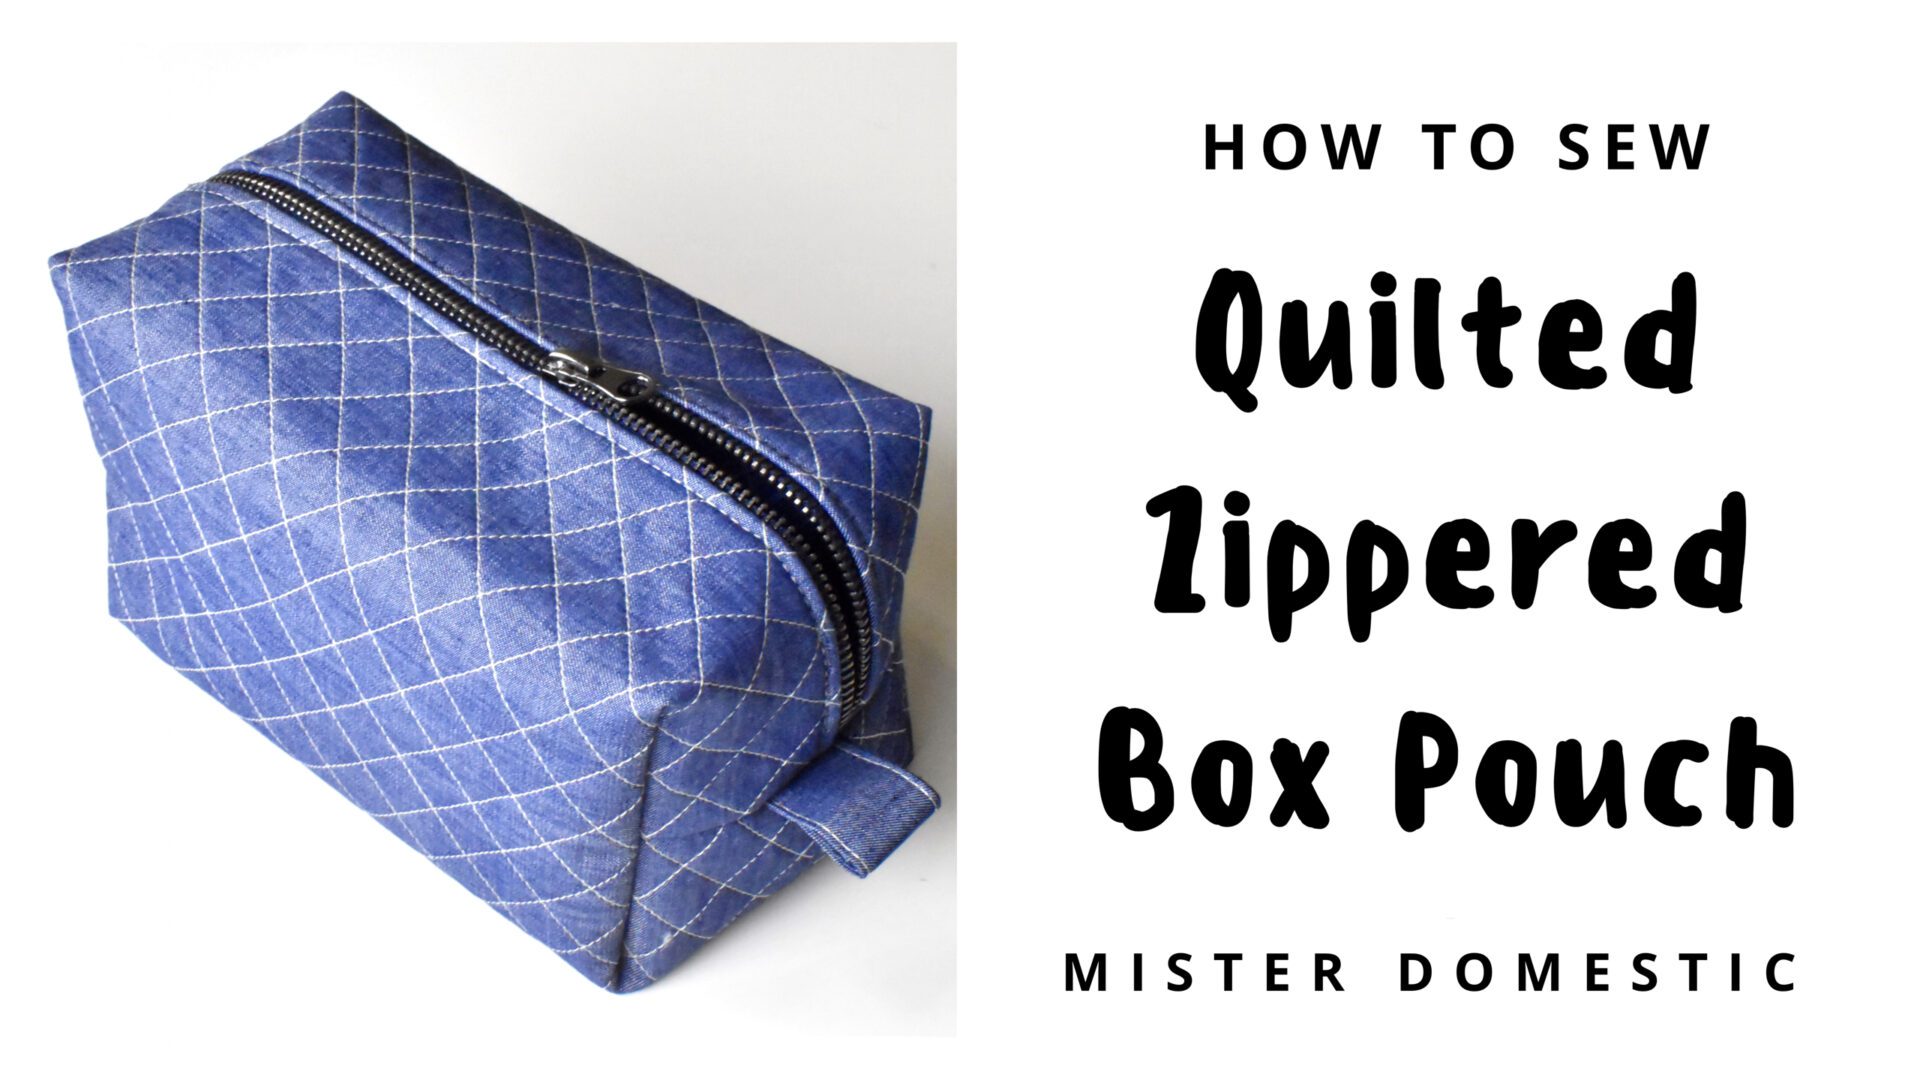 Quilted Zippered Box Pouch copy.jpg